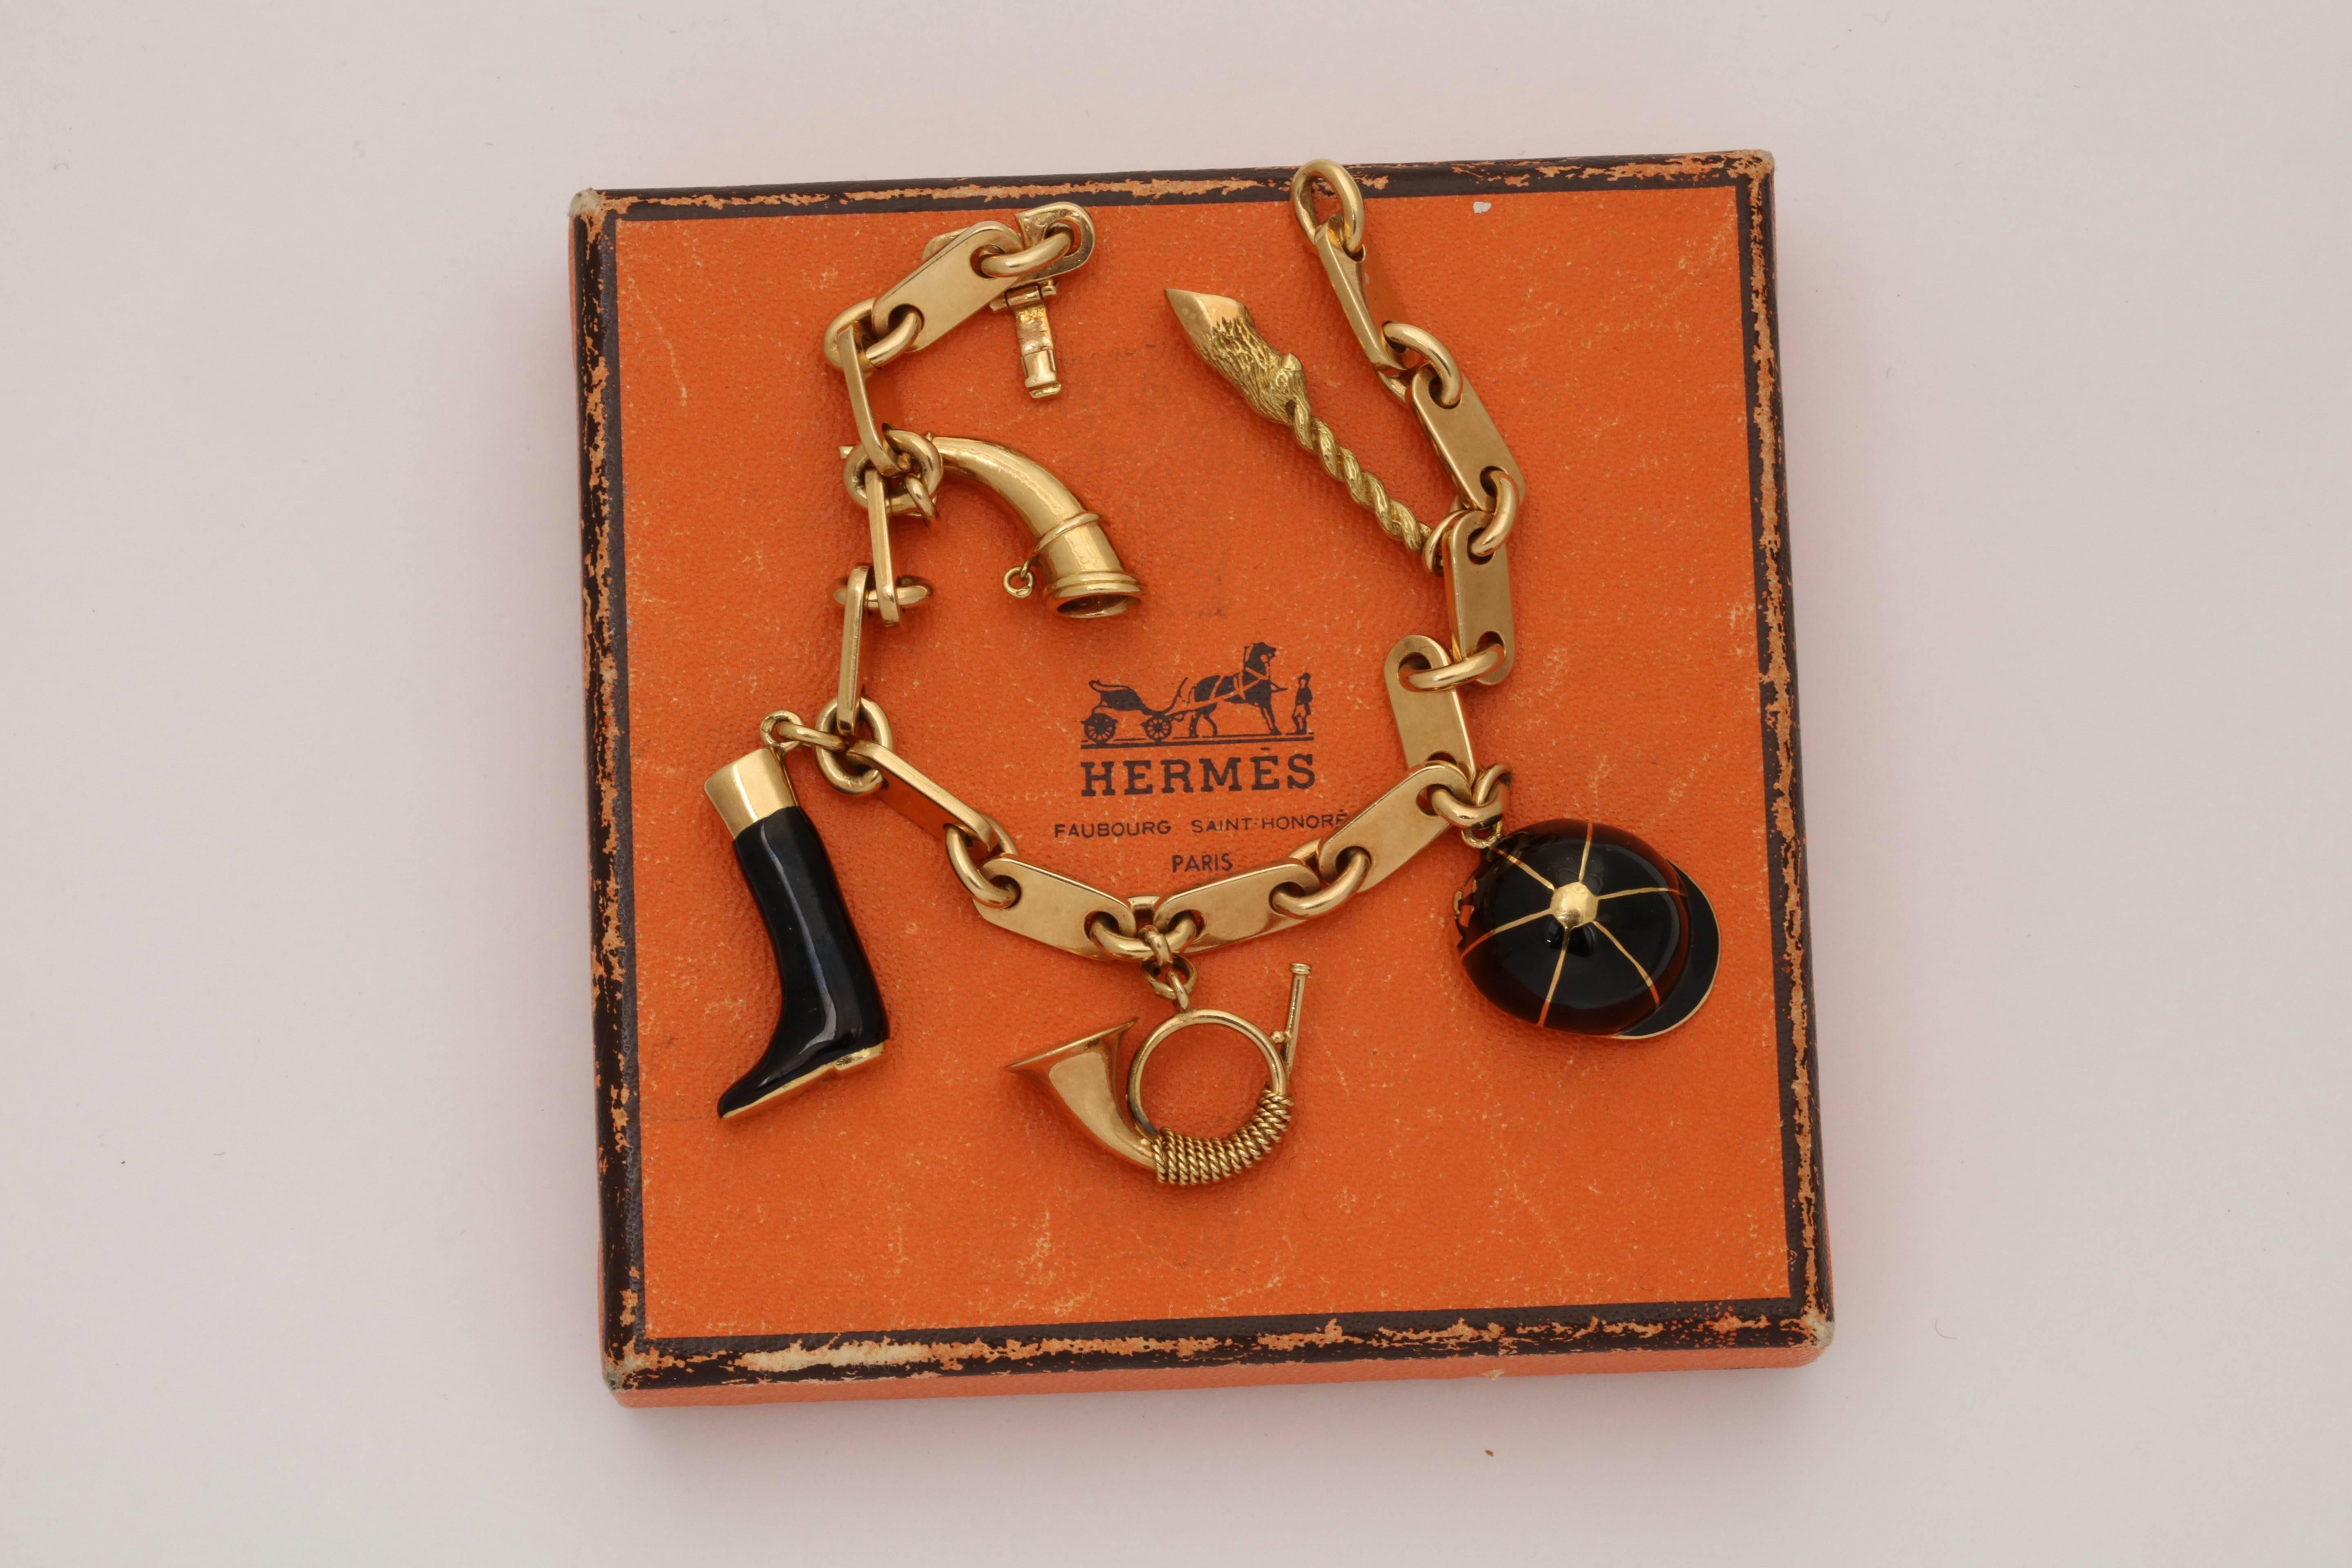 Hermes Paris Equestrian And Musical Motif 18kt Gold Charm Bracelet Consisting Of Alternating Equestrian Type Charms In Black Enamel And Two 18kt Musical Related Charms With One Fish With Scales Charm in 18kt Yellow Gold. All Attached To A Beautiful